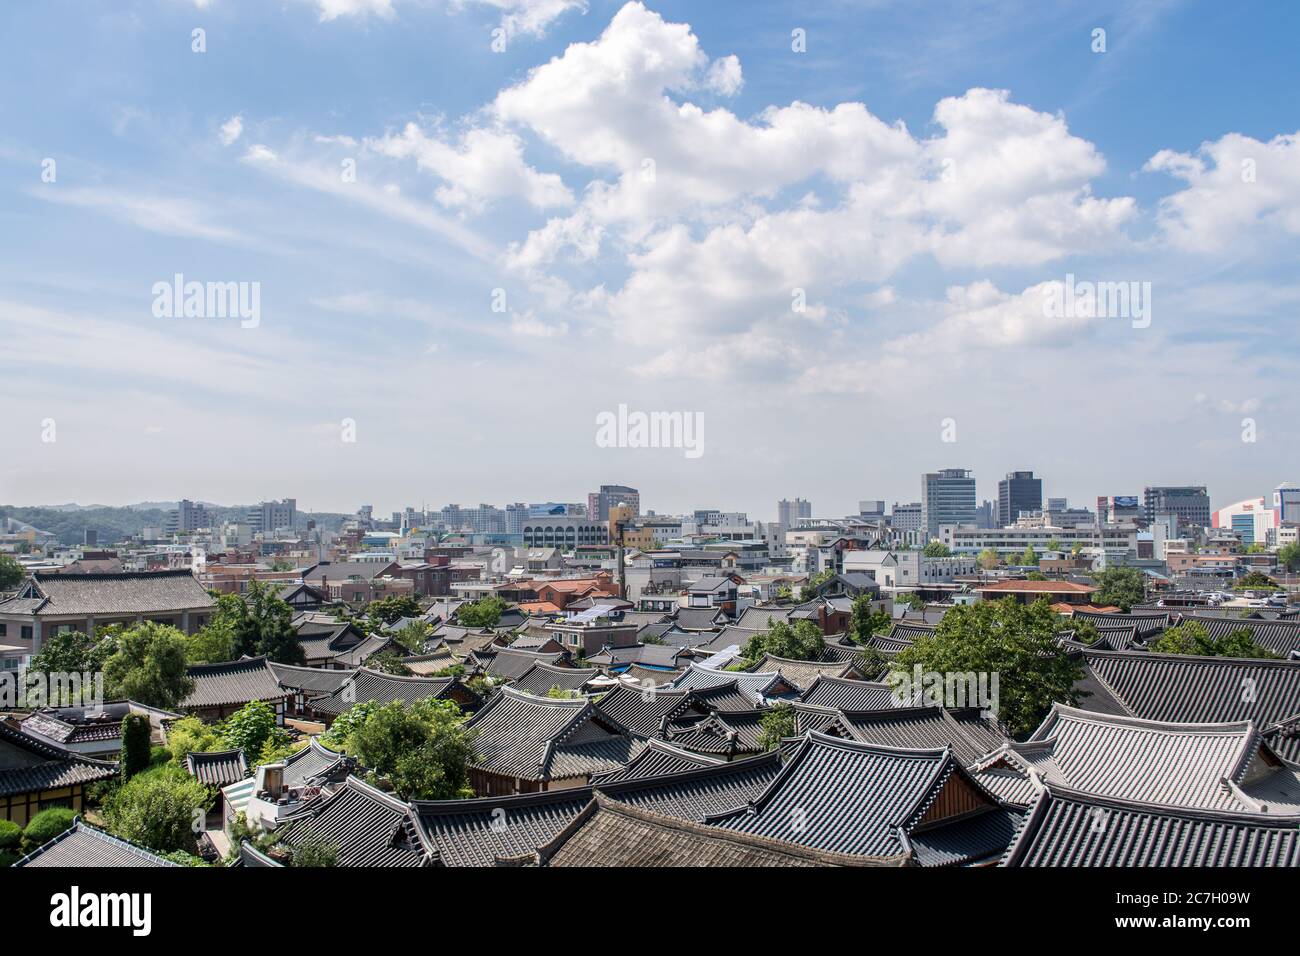 Jeonju, South Korea - A view of Hanok Village, Korean traditional house village behind the business district with modern office buildings. Panorama. Stock Photo